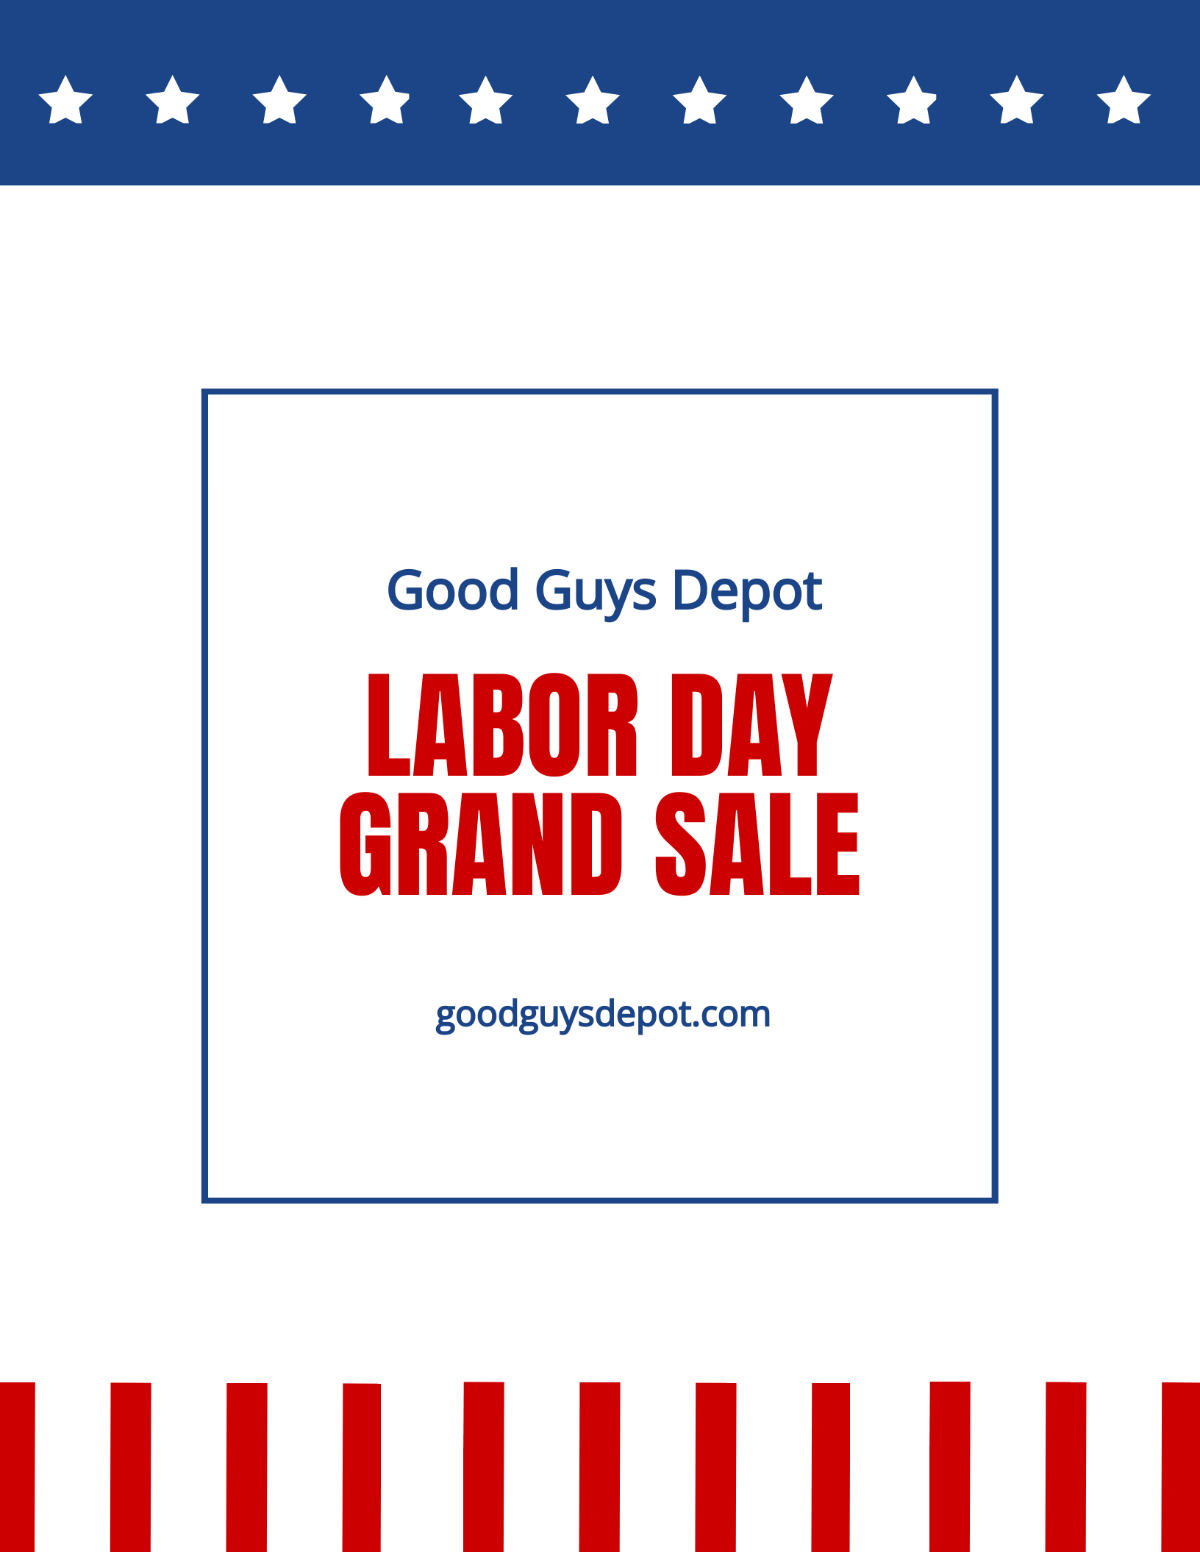 Labor Day Sale Flyer Template